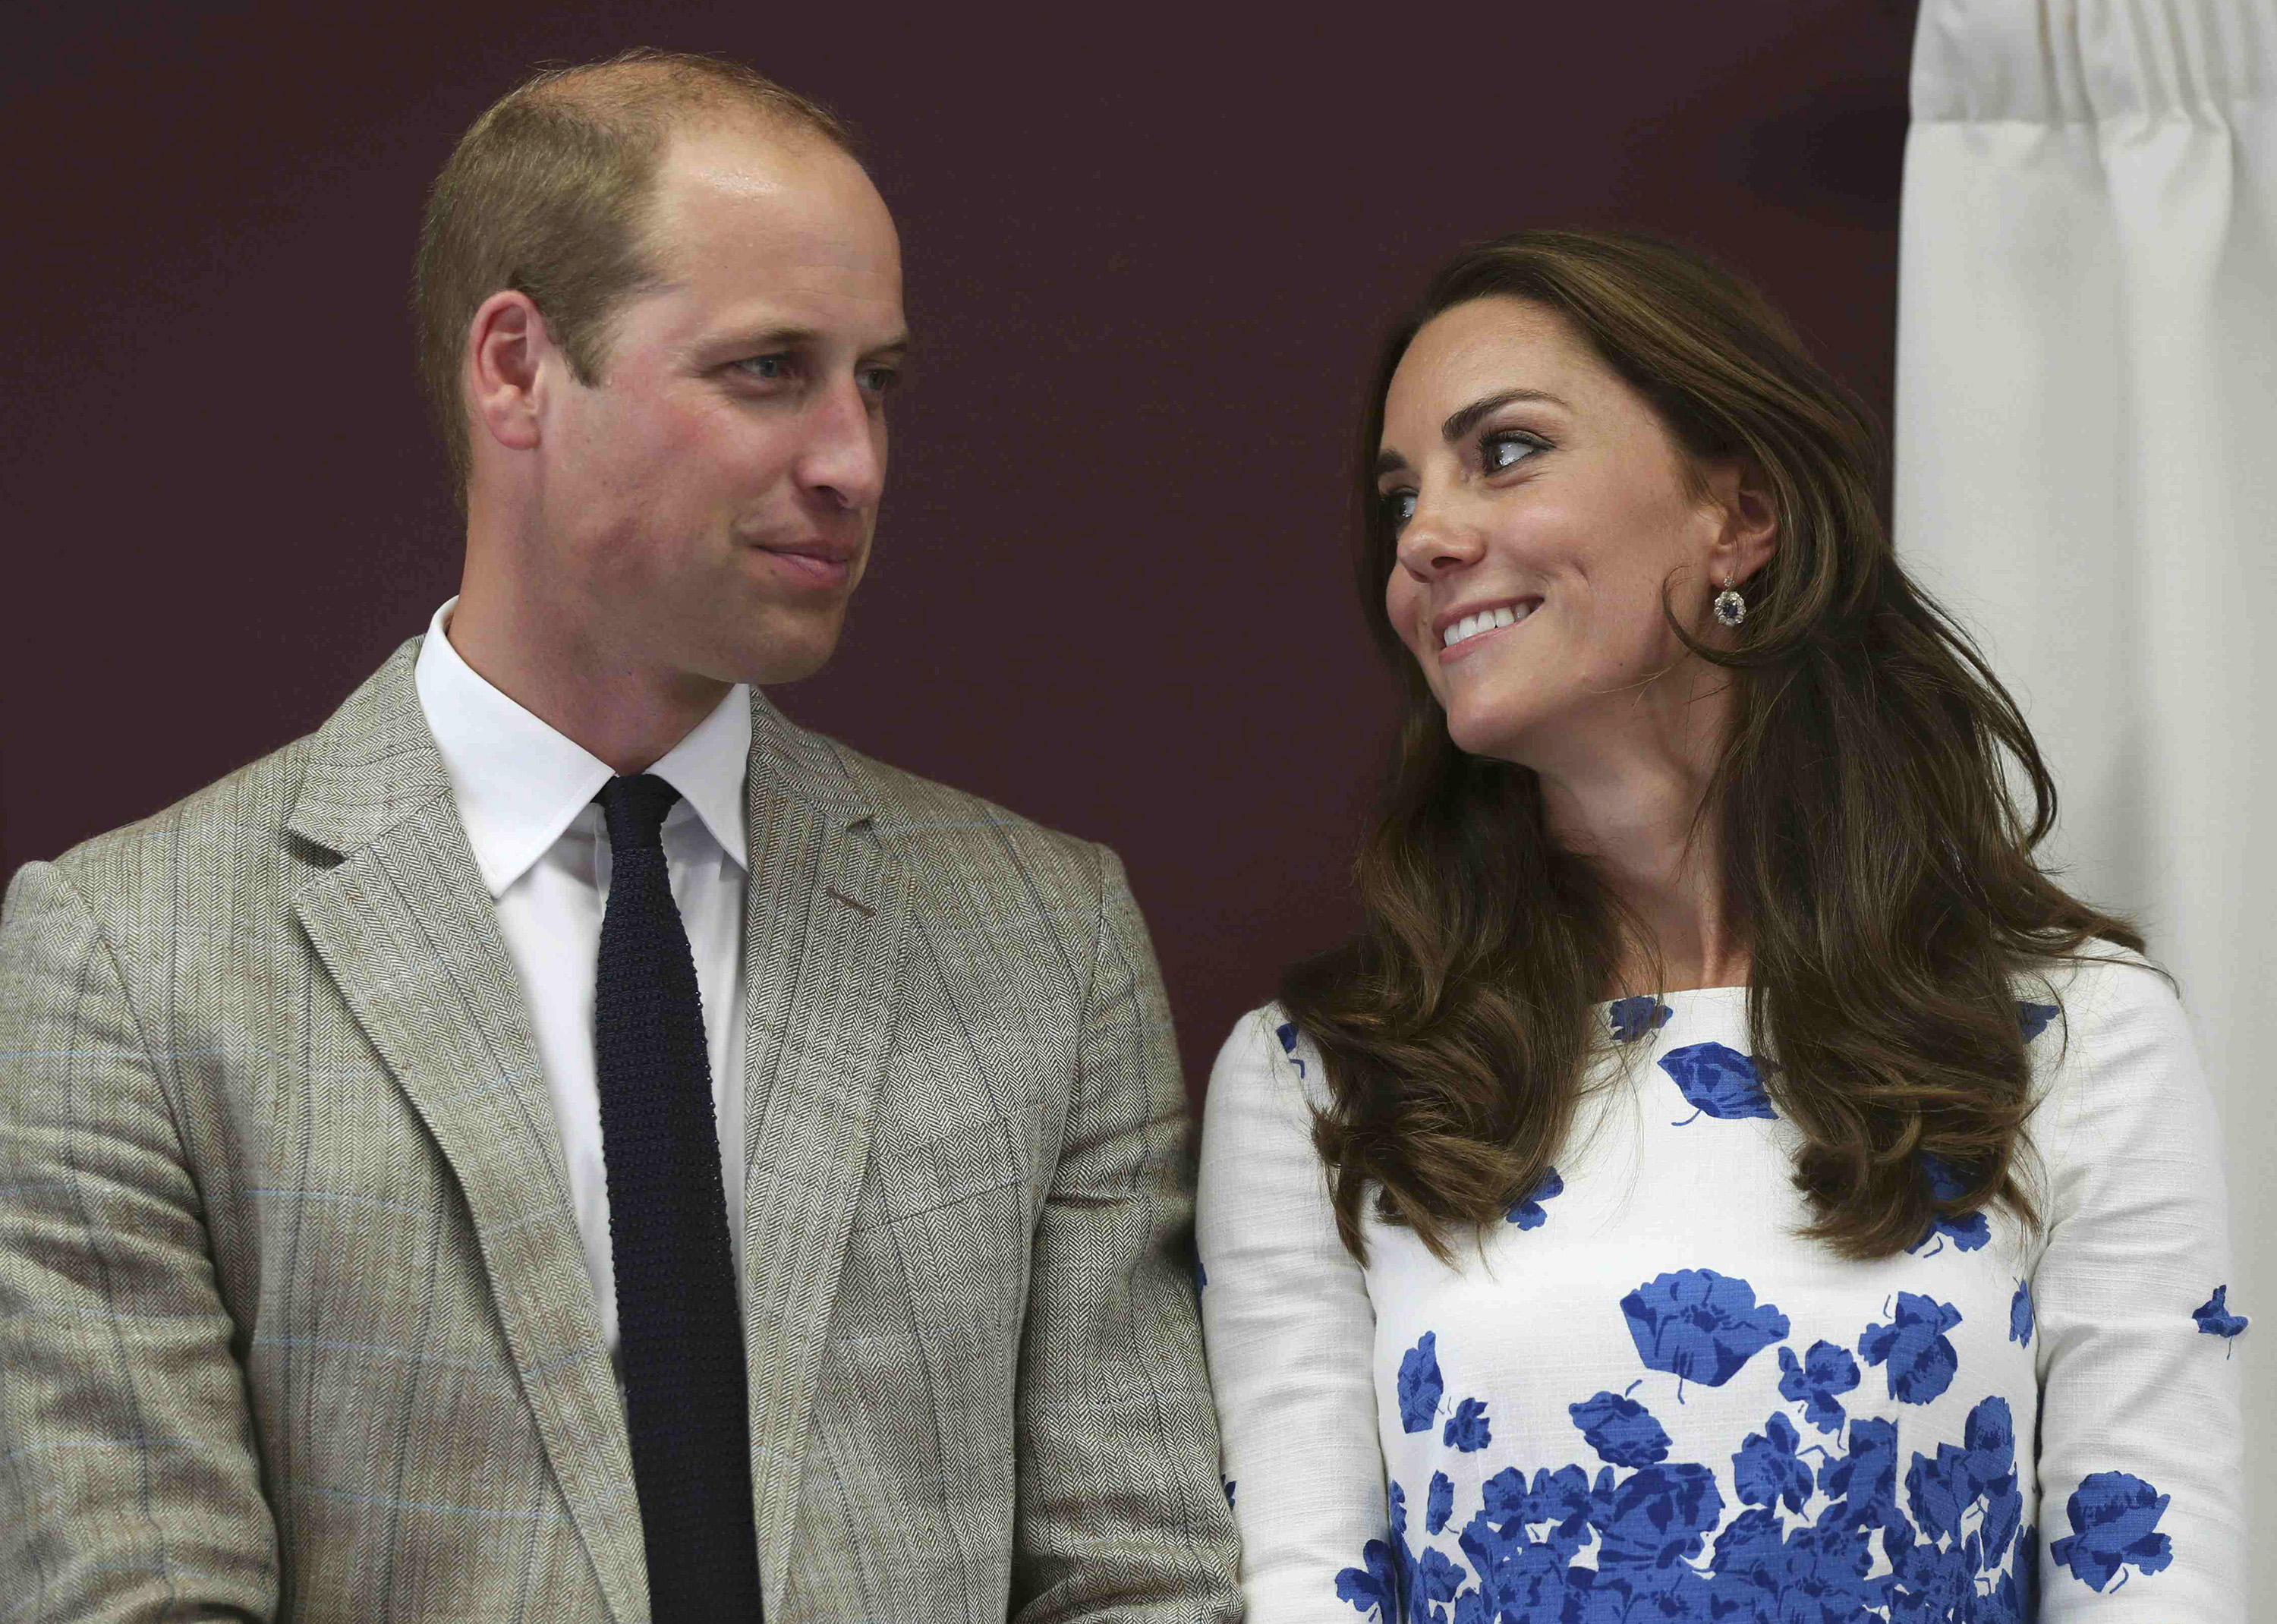 The Duke and Duchess of Cambridge visit Keech Hospice Care and tour the children's and adult hospices in Luton, Bedfordshire, UK, on the 24th August 2016. Picture by Eddie Keogh/WPA-Pool Pictured: Prince William, Duke of Cambridge, Duchess of Cambridge, Catherine, Kate Middleton Ref: SPL1339973 240816 Picture by: Splash News Splash News and Pictures Los Angeles:310-821-2666 New York: 212-619-2666 London: 870-934-2666 photodesk@splashnews.com 